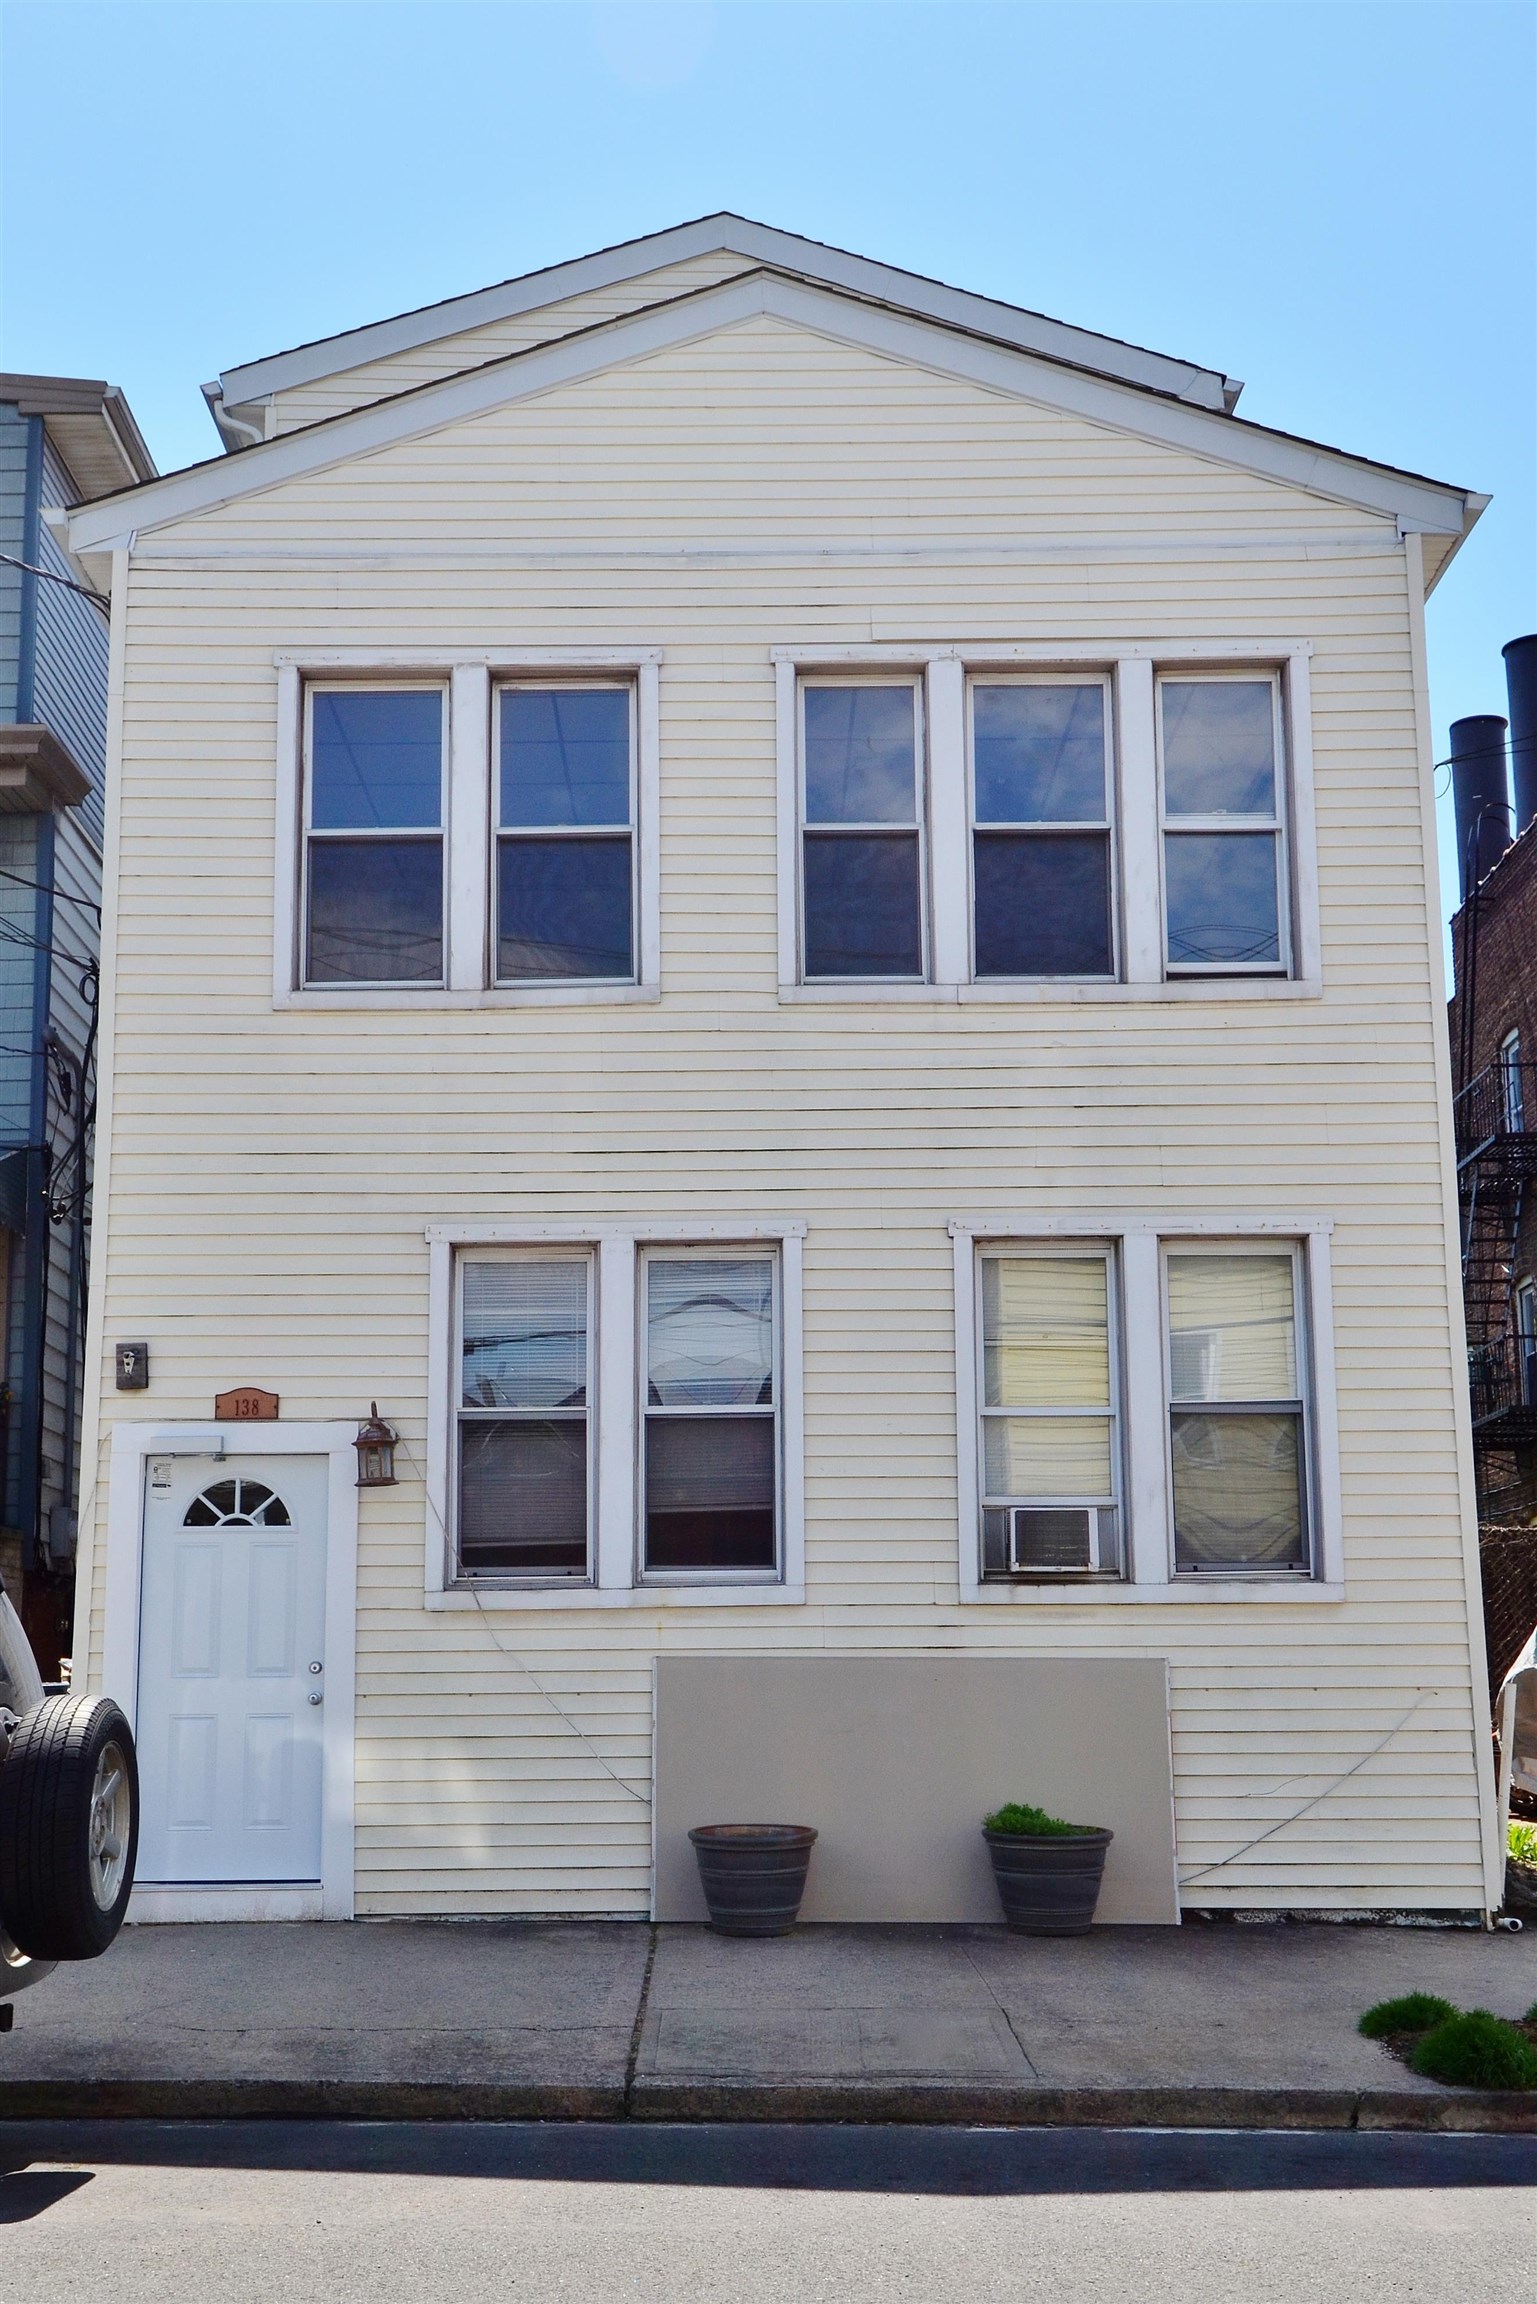 # 240006867 - For Rent in Bayonne NJ